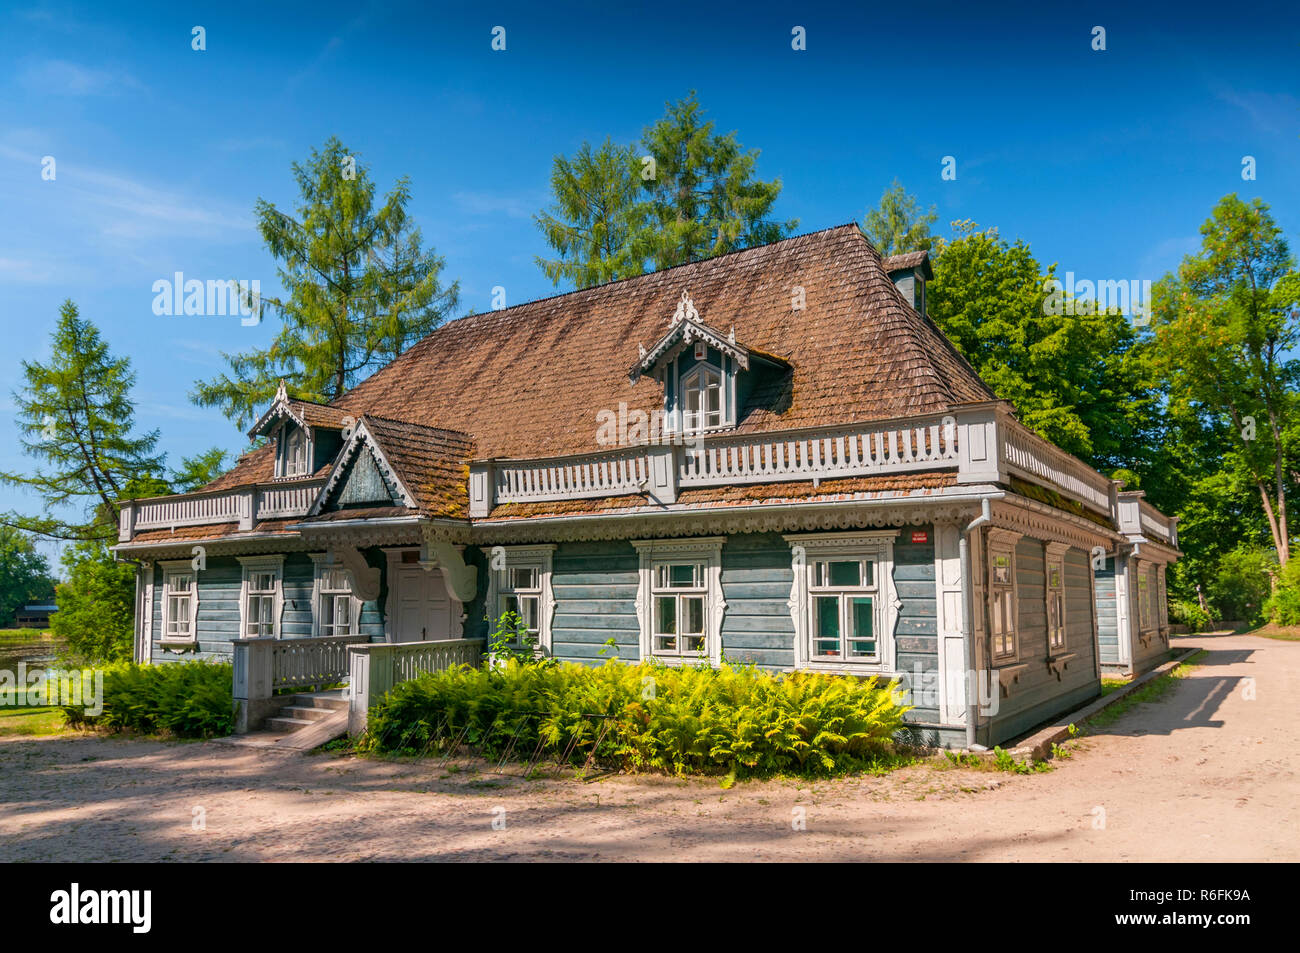 Historic Manor House Situated In Palace Park Dating From 1845, The Oldest Building In Bialowieza Town, Poland Stock Photo